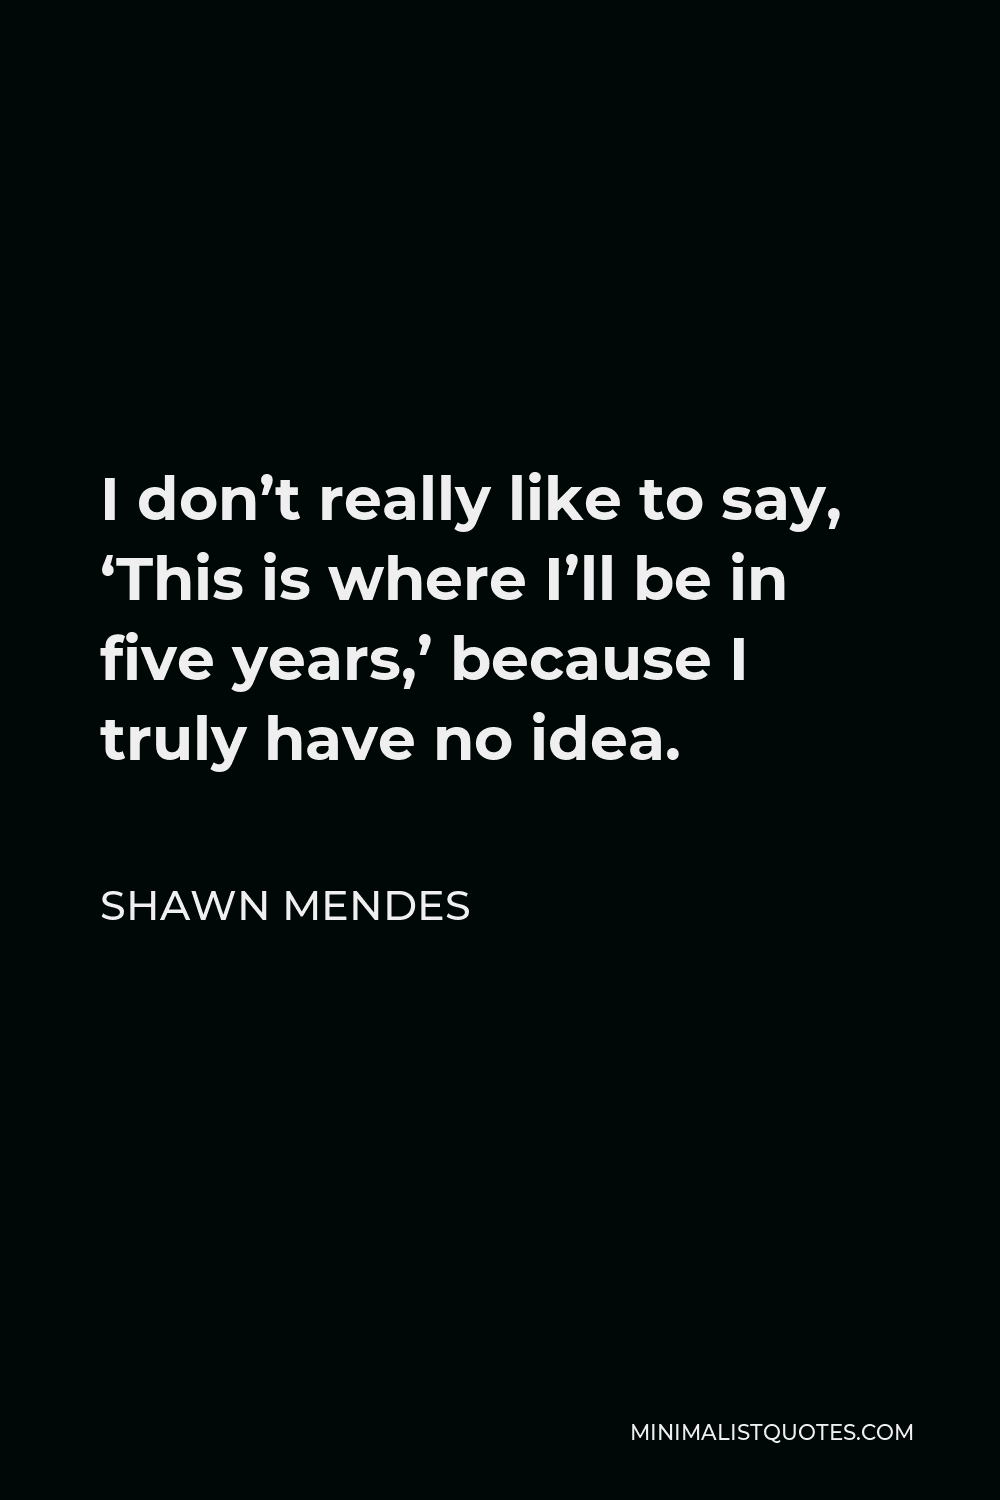 Shawn Mendes Quote - I don’t really like to say, ‘This is where I’ll be in five years,’ because I truly have no idea.